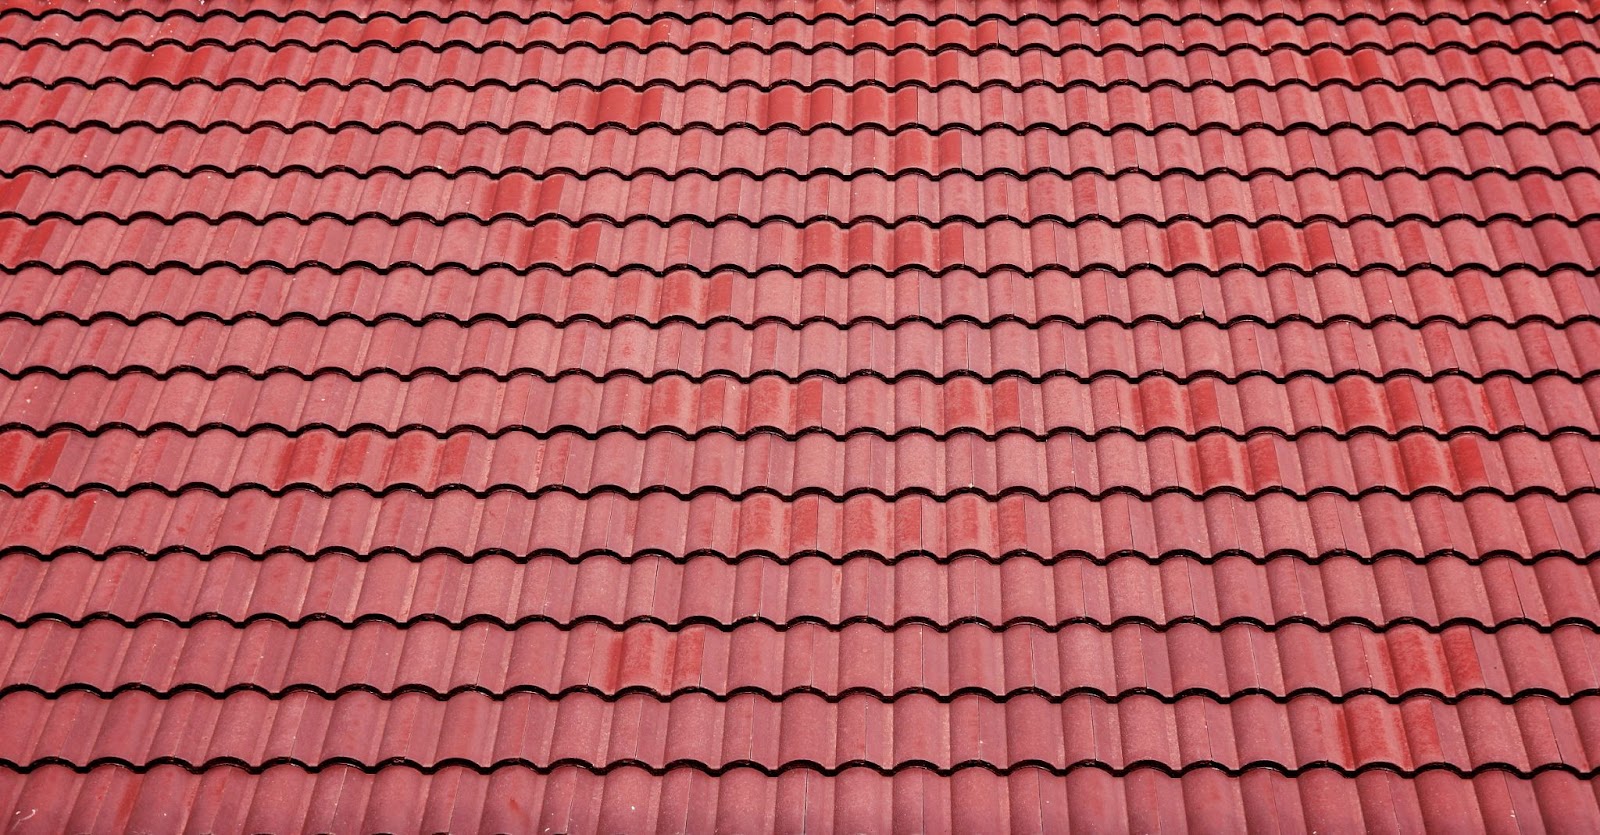 A red brick roof